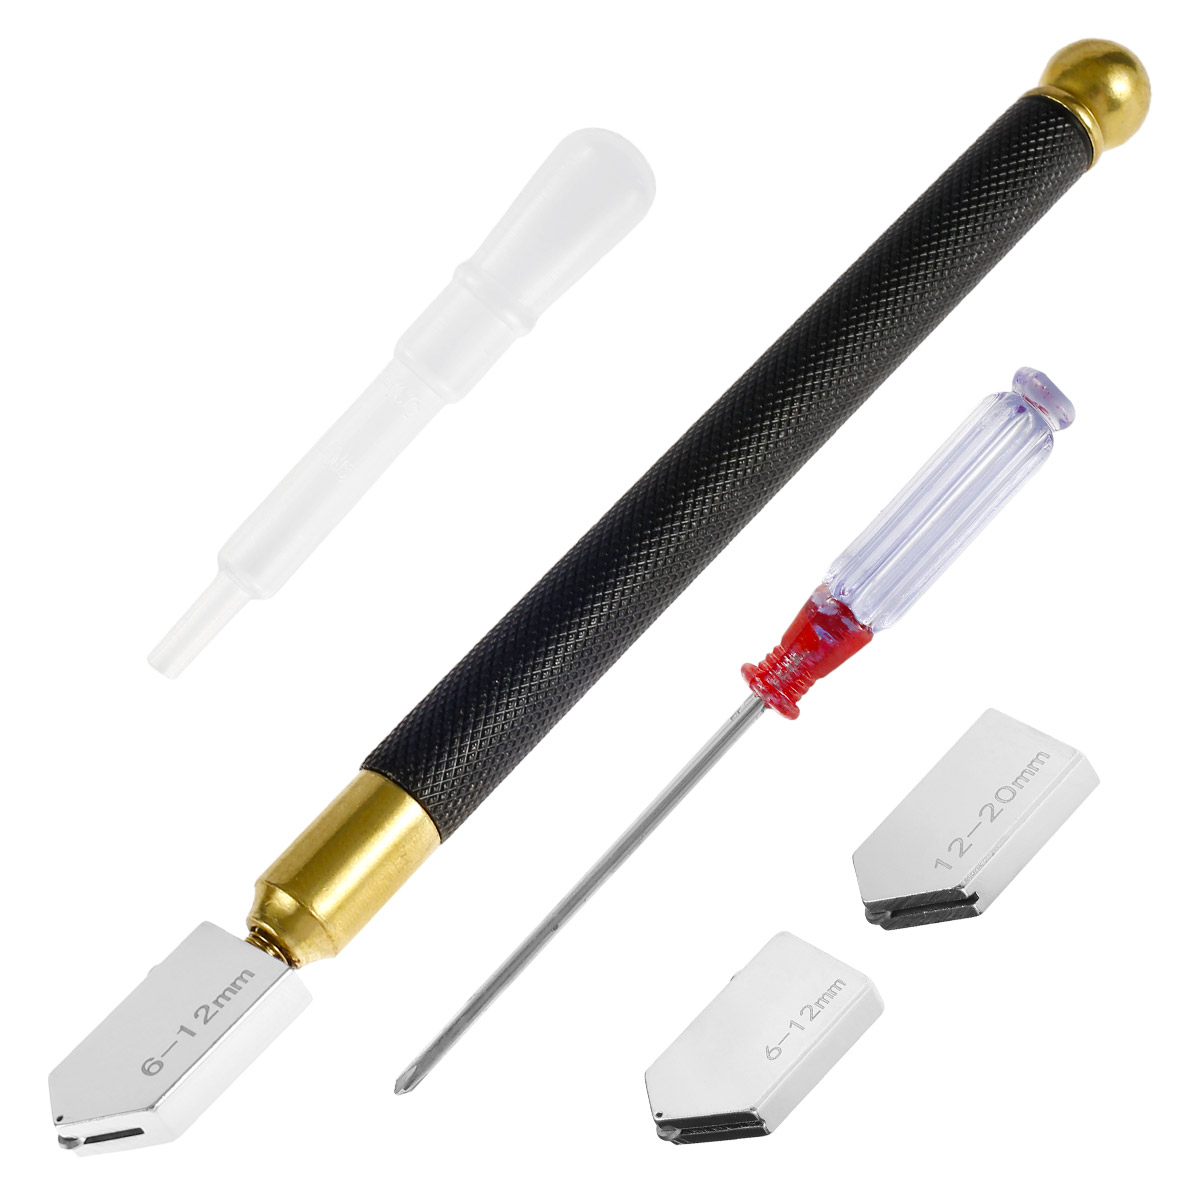 Duety Glass Cutter Kit with Cutting Oil, 2mm-20mm Cutting Head, Aotomatic Oil Feed, Pencil Oil Feed Carbide Tip Glass Cutter Tool, Size: 5pcs